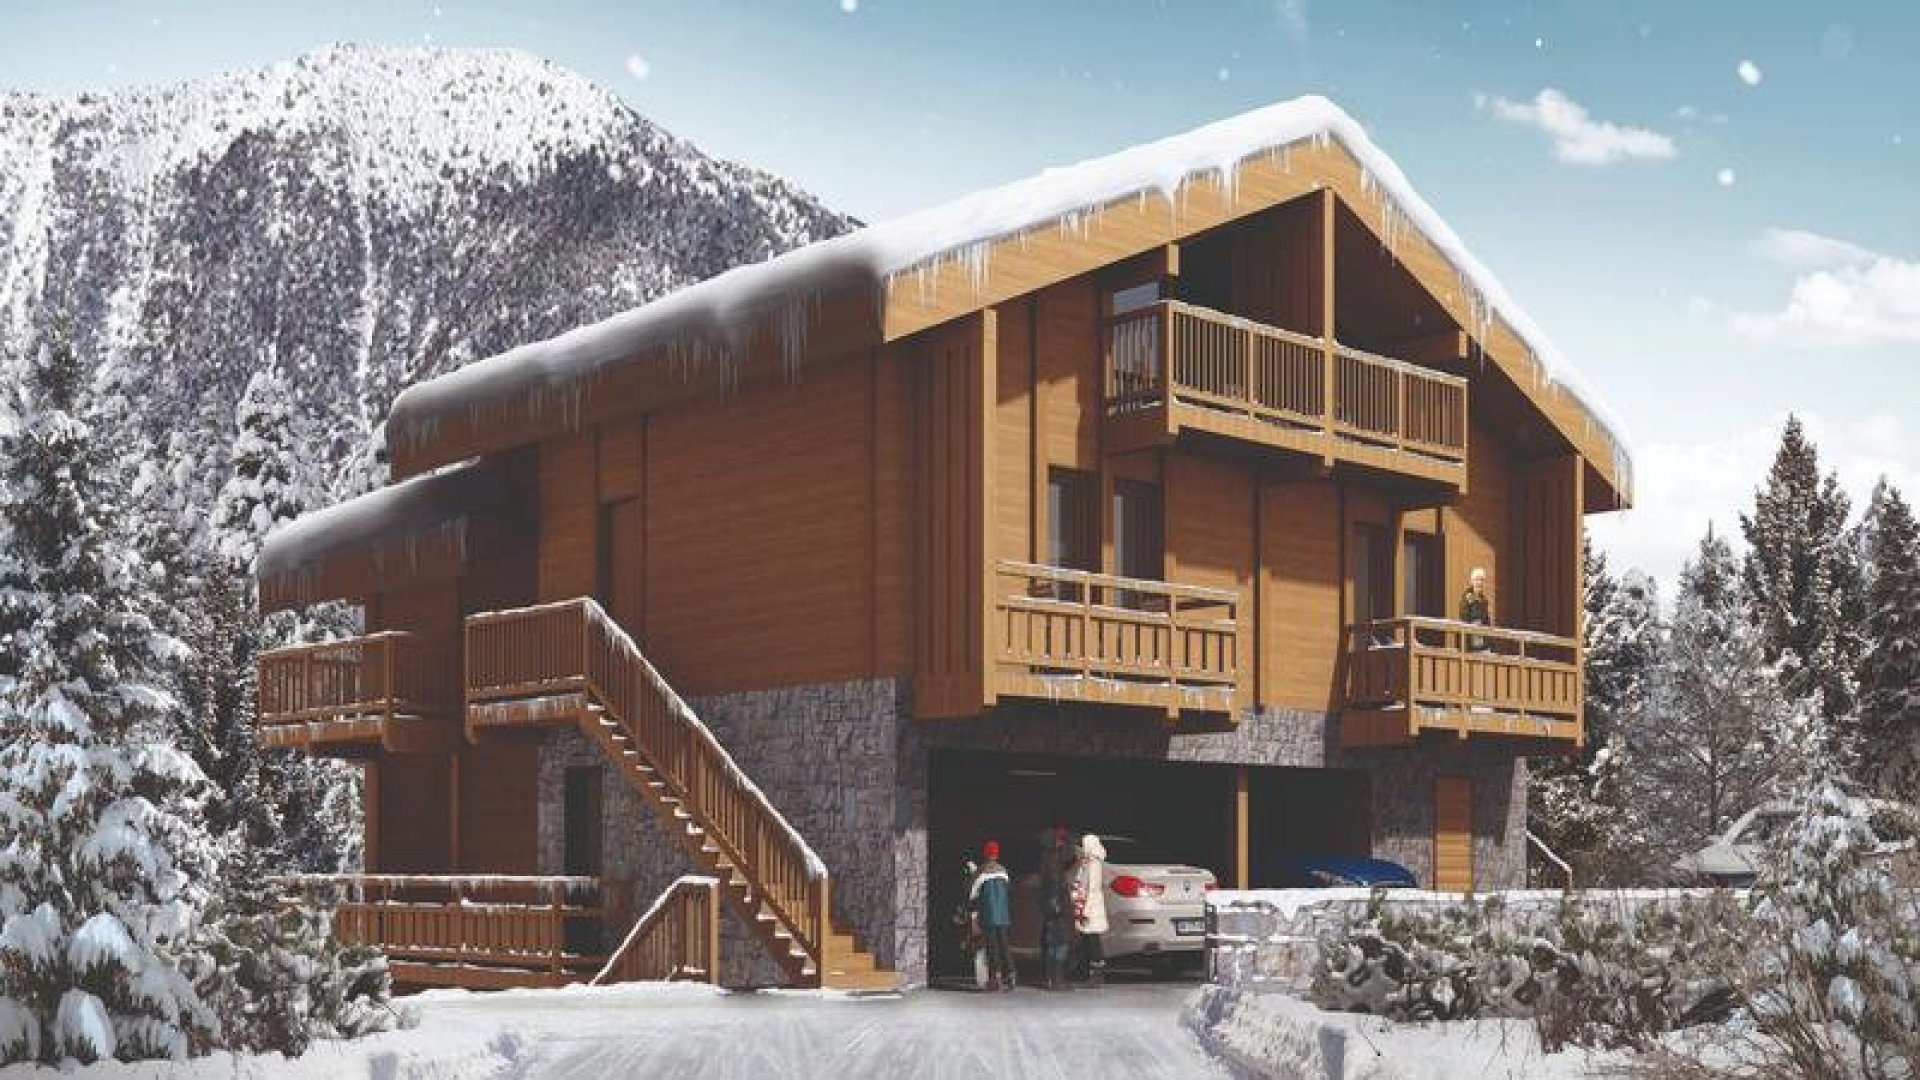 2 bedroom new build apartment for sale in Courchevel